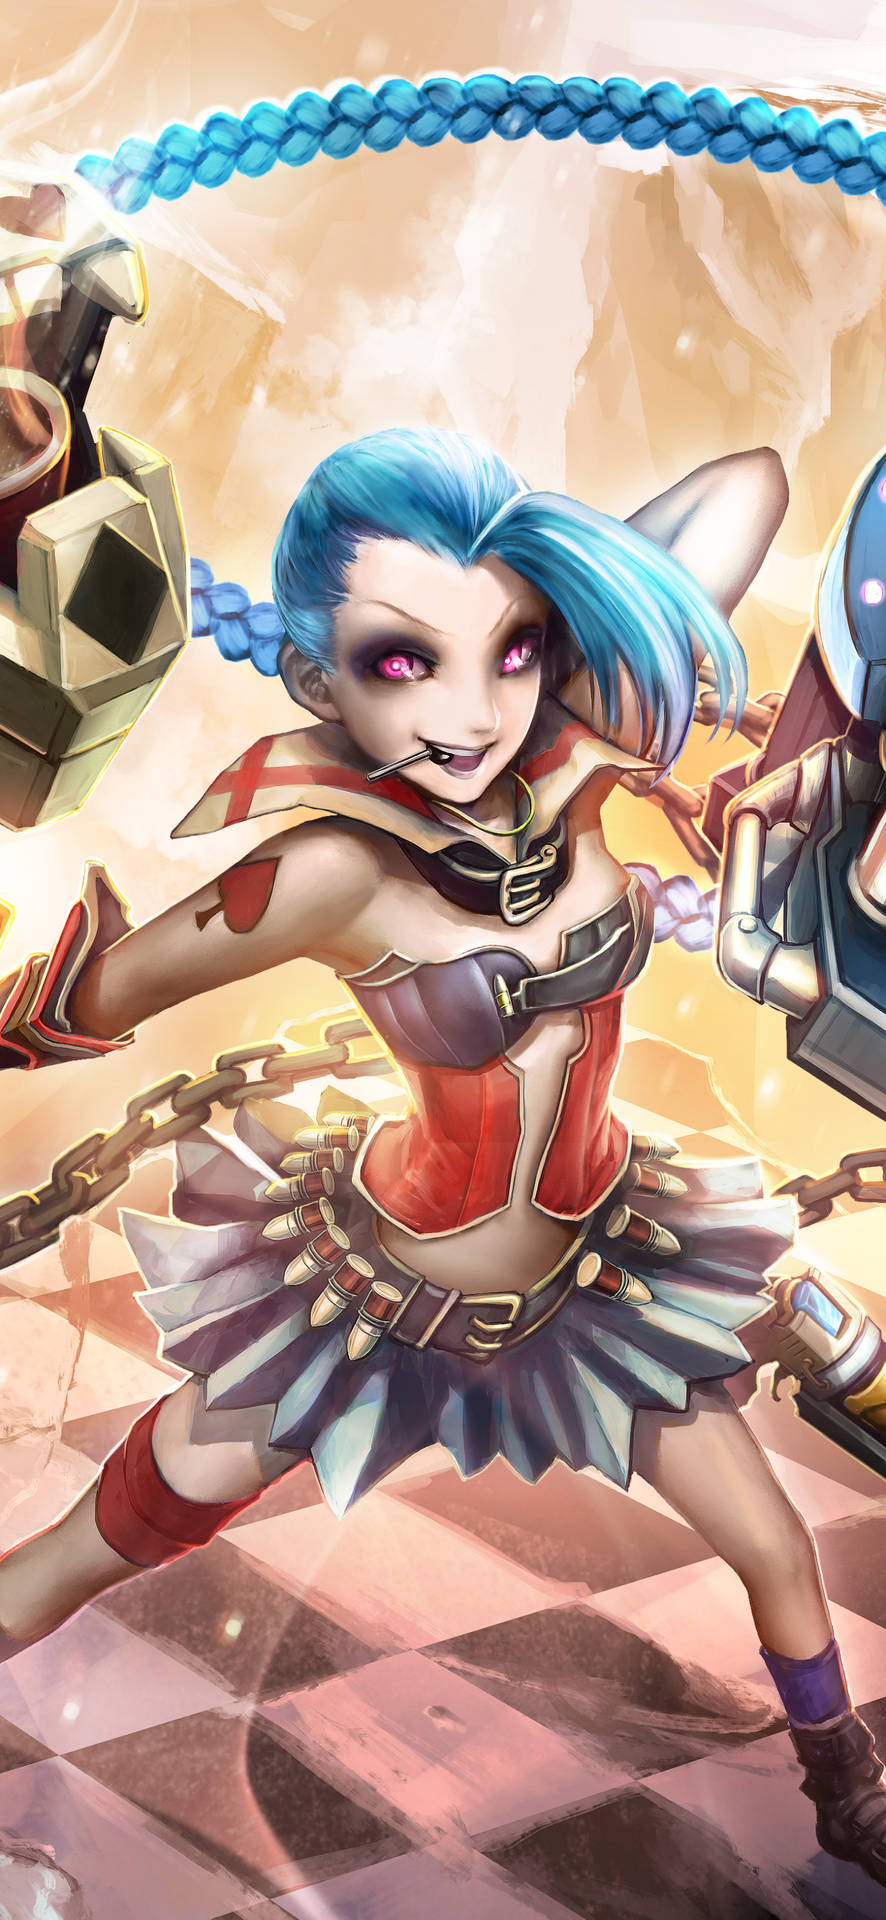 4k Gaming Phone Featuring Jinx From League Of Legends Background